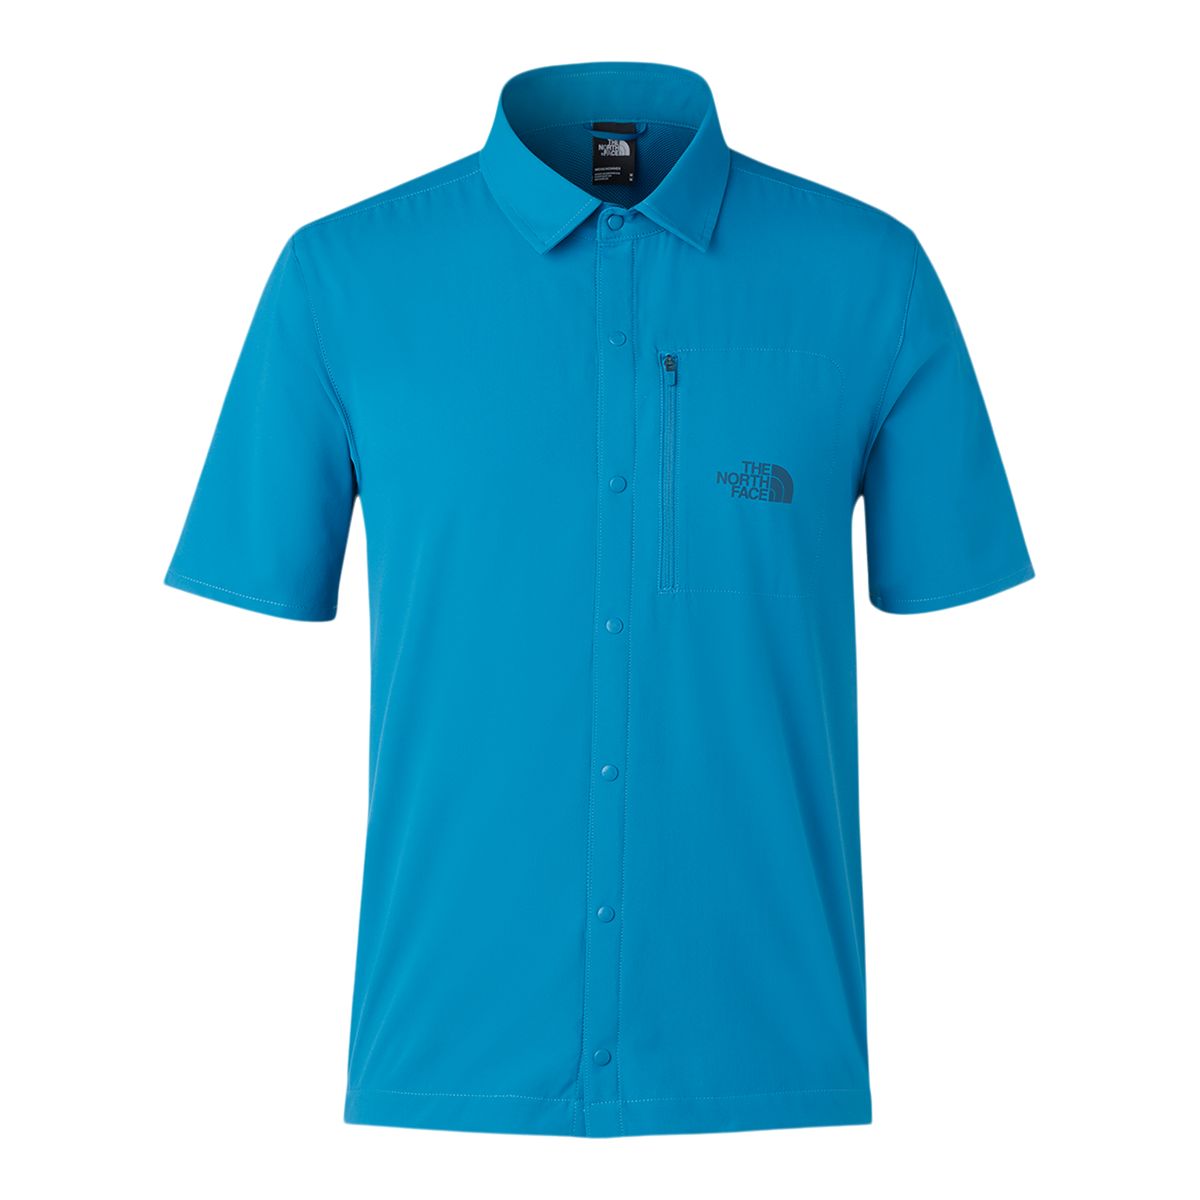 The North Face Men's First Trail UPF T Shirt | Atmosphere